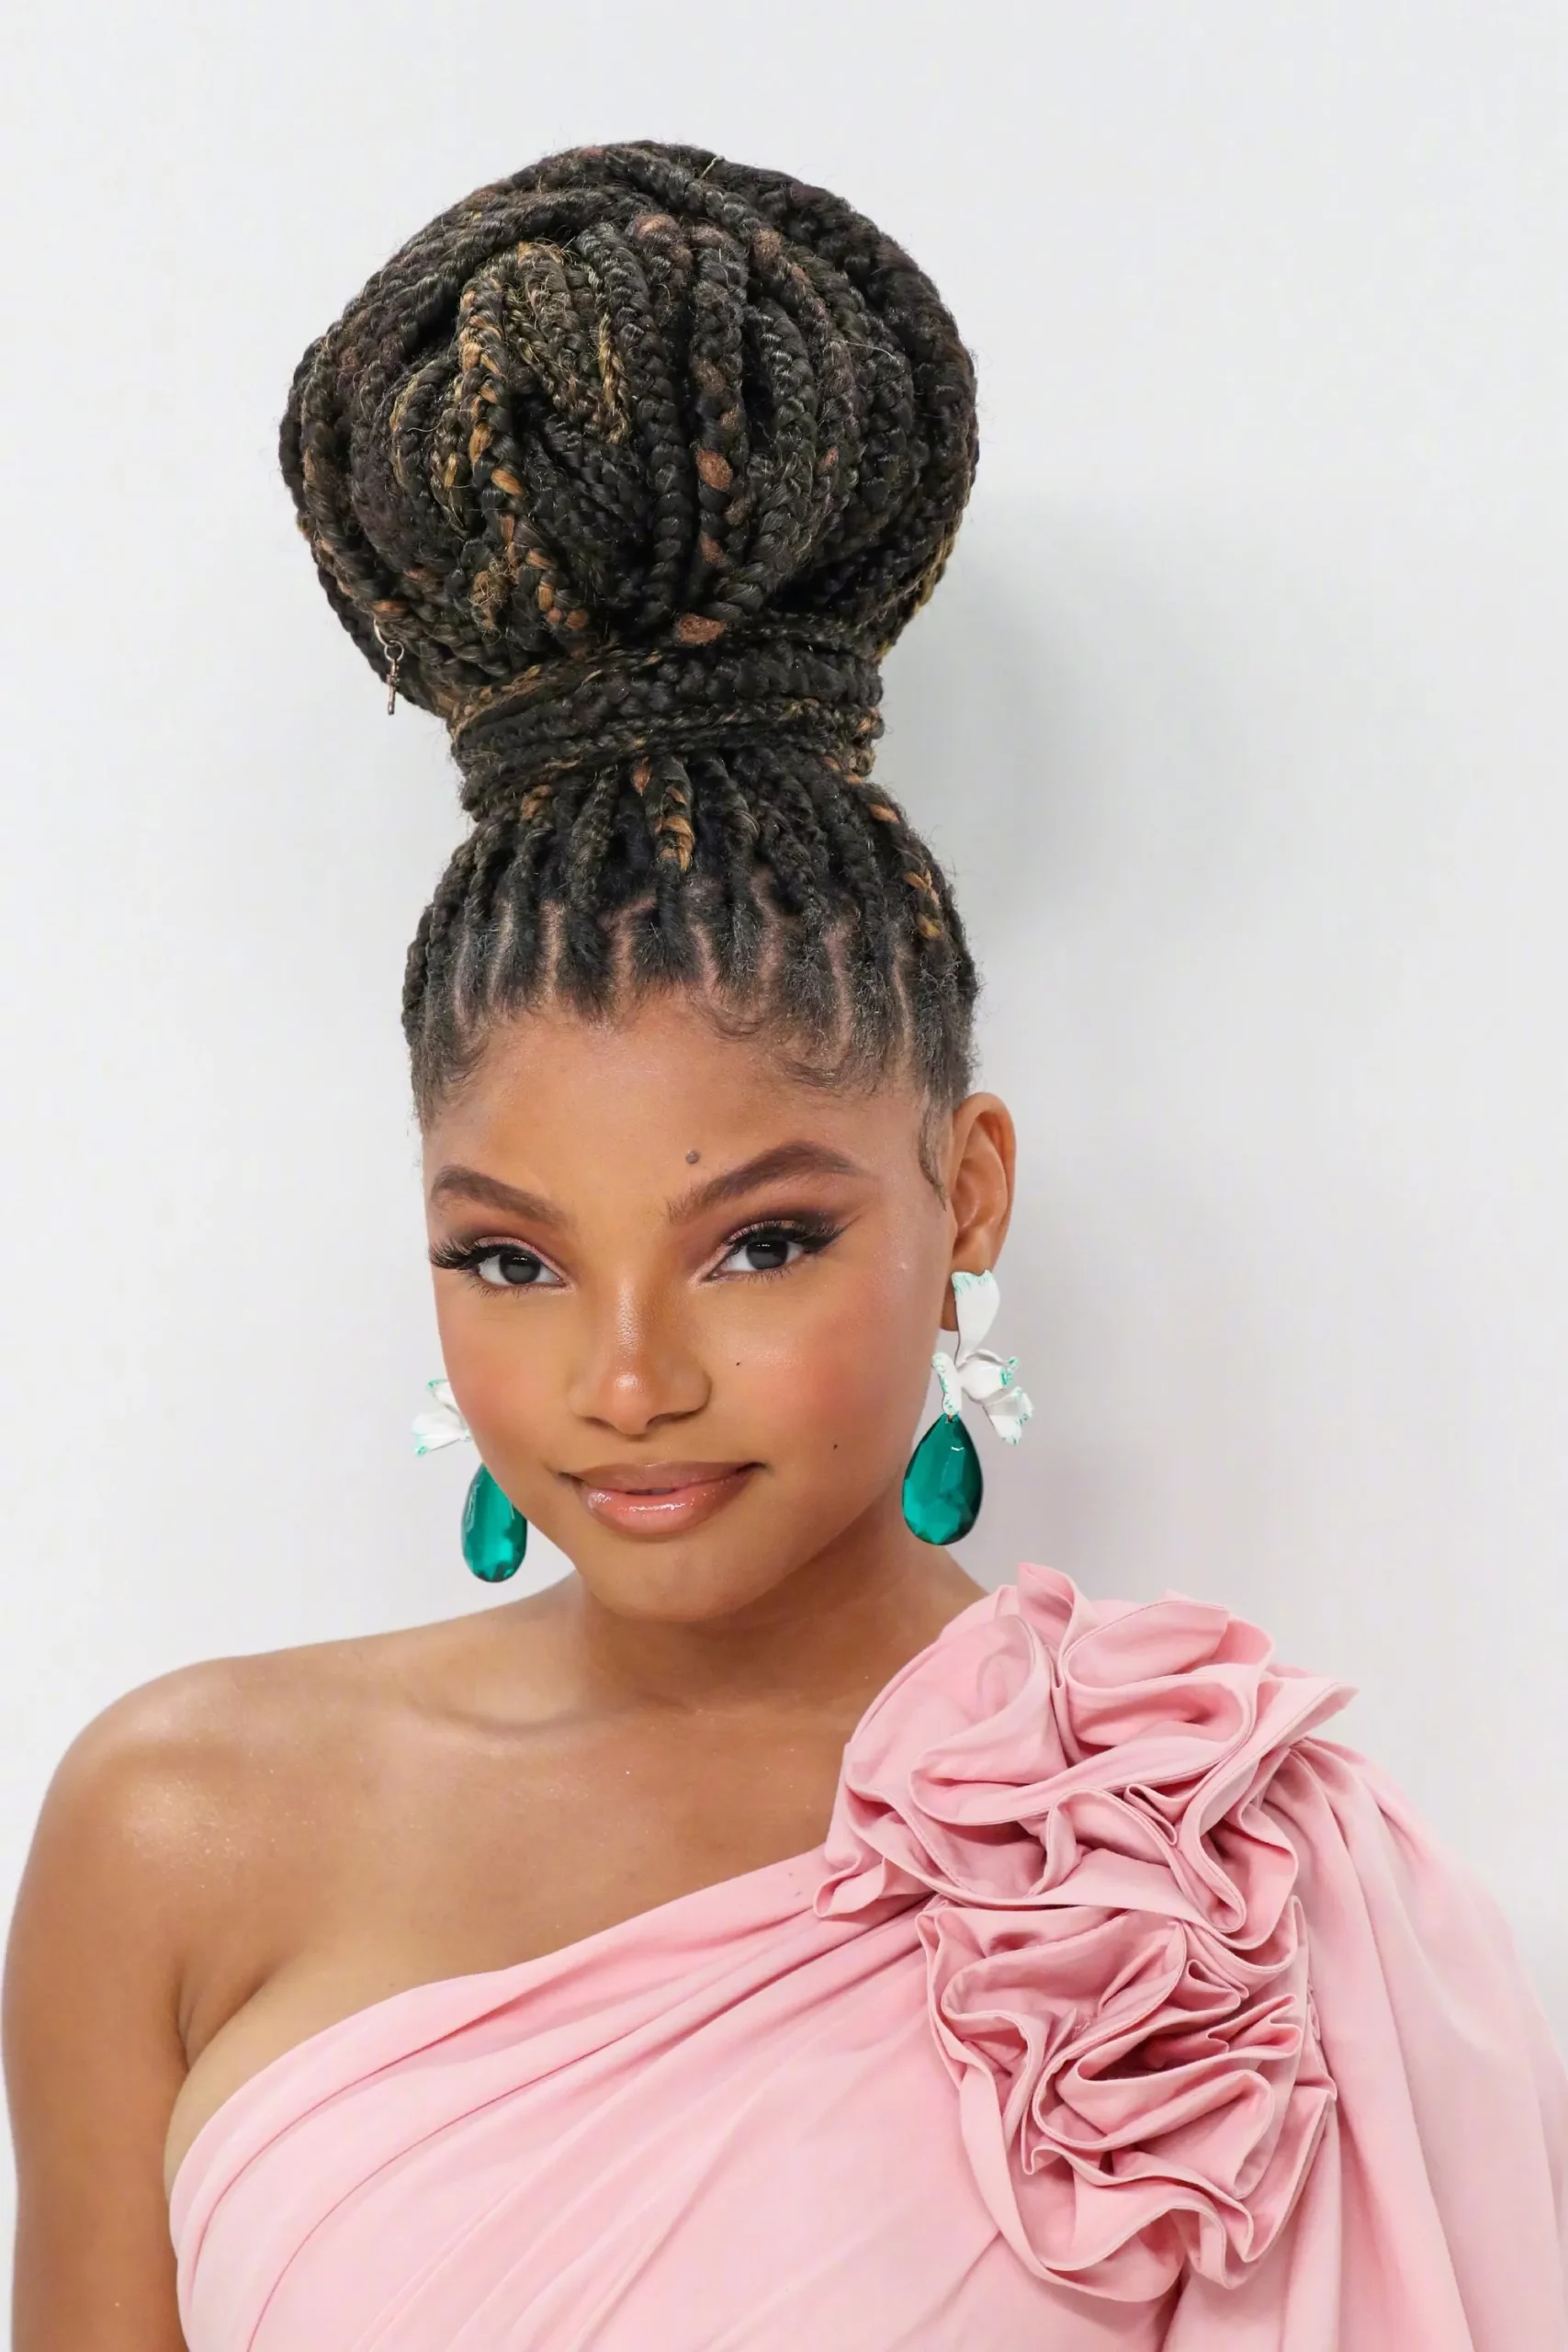 Halle Bailey Attends CFDA Awards ​​​ | FMV6